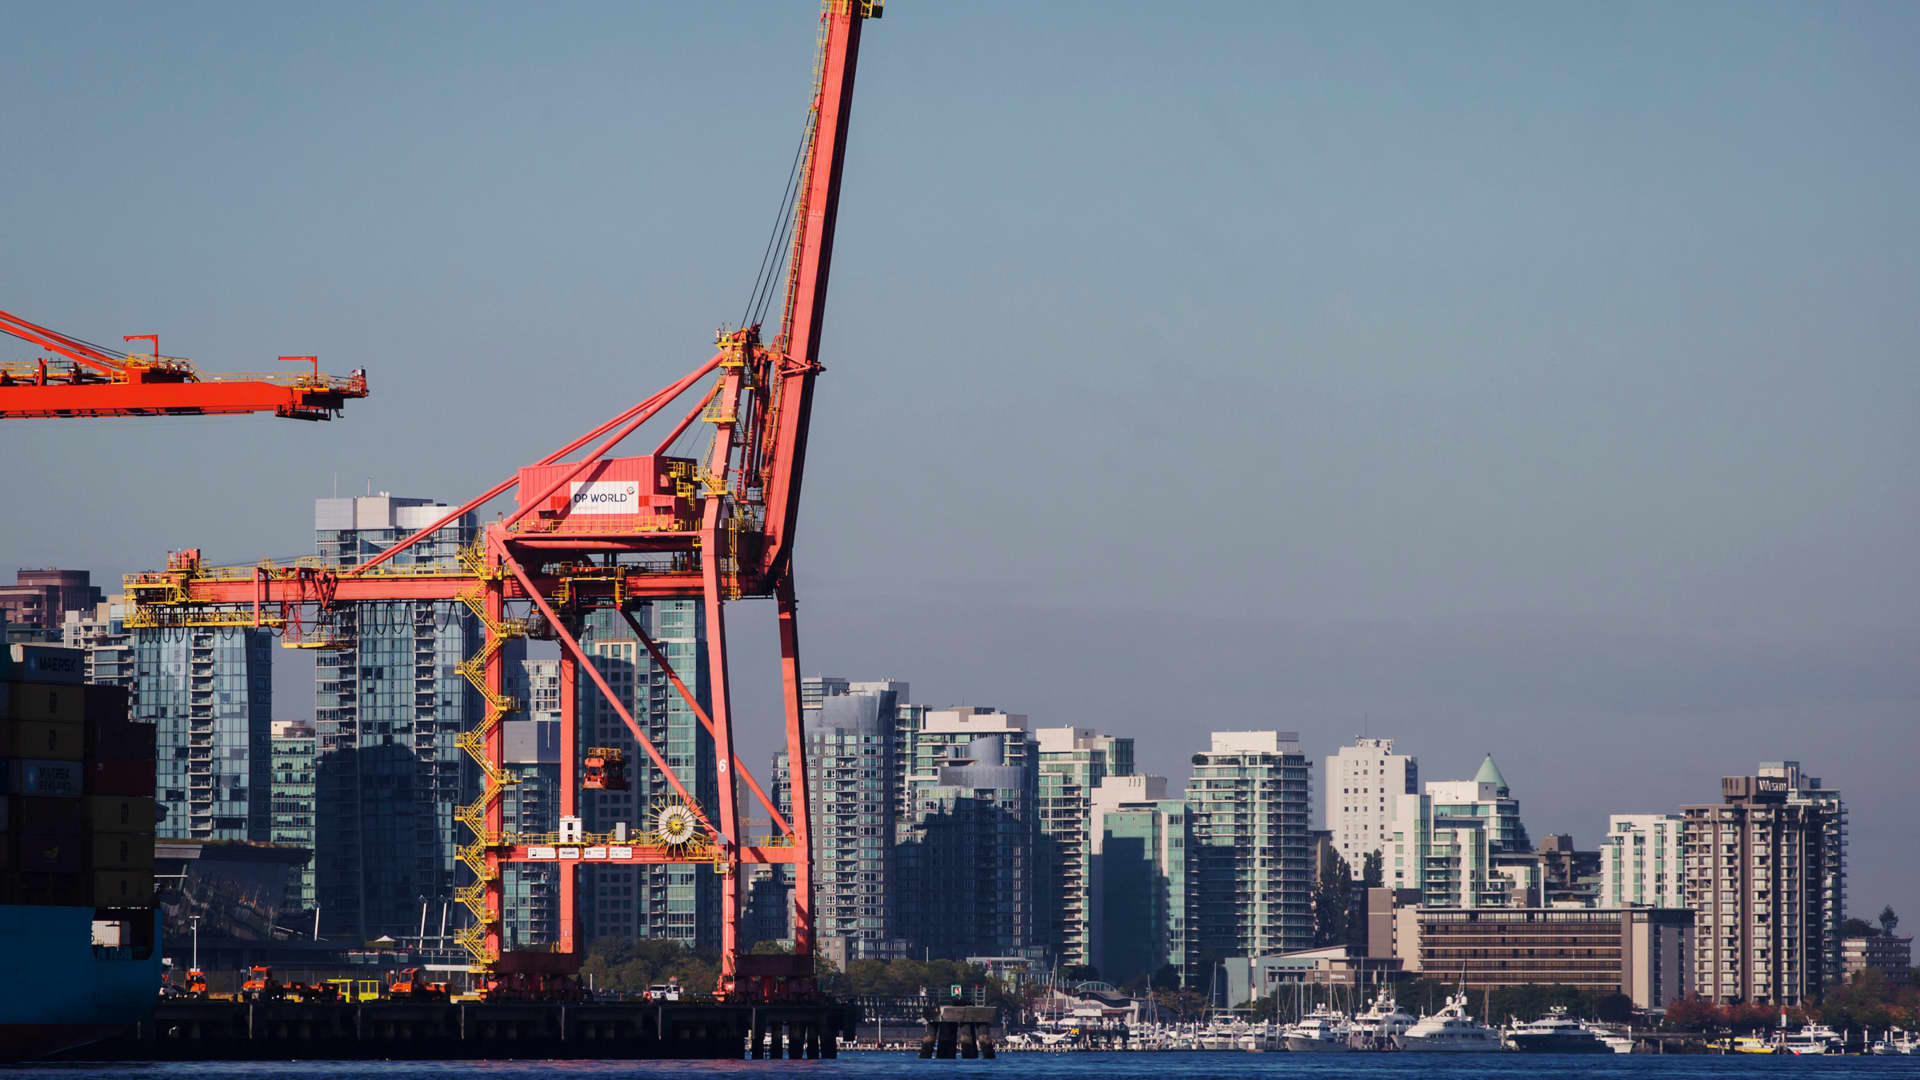 Canadian West Coast ports strike is over, but it will take weeks for supply chain to recover